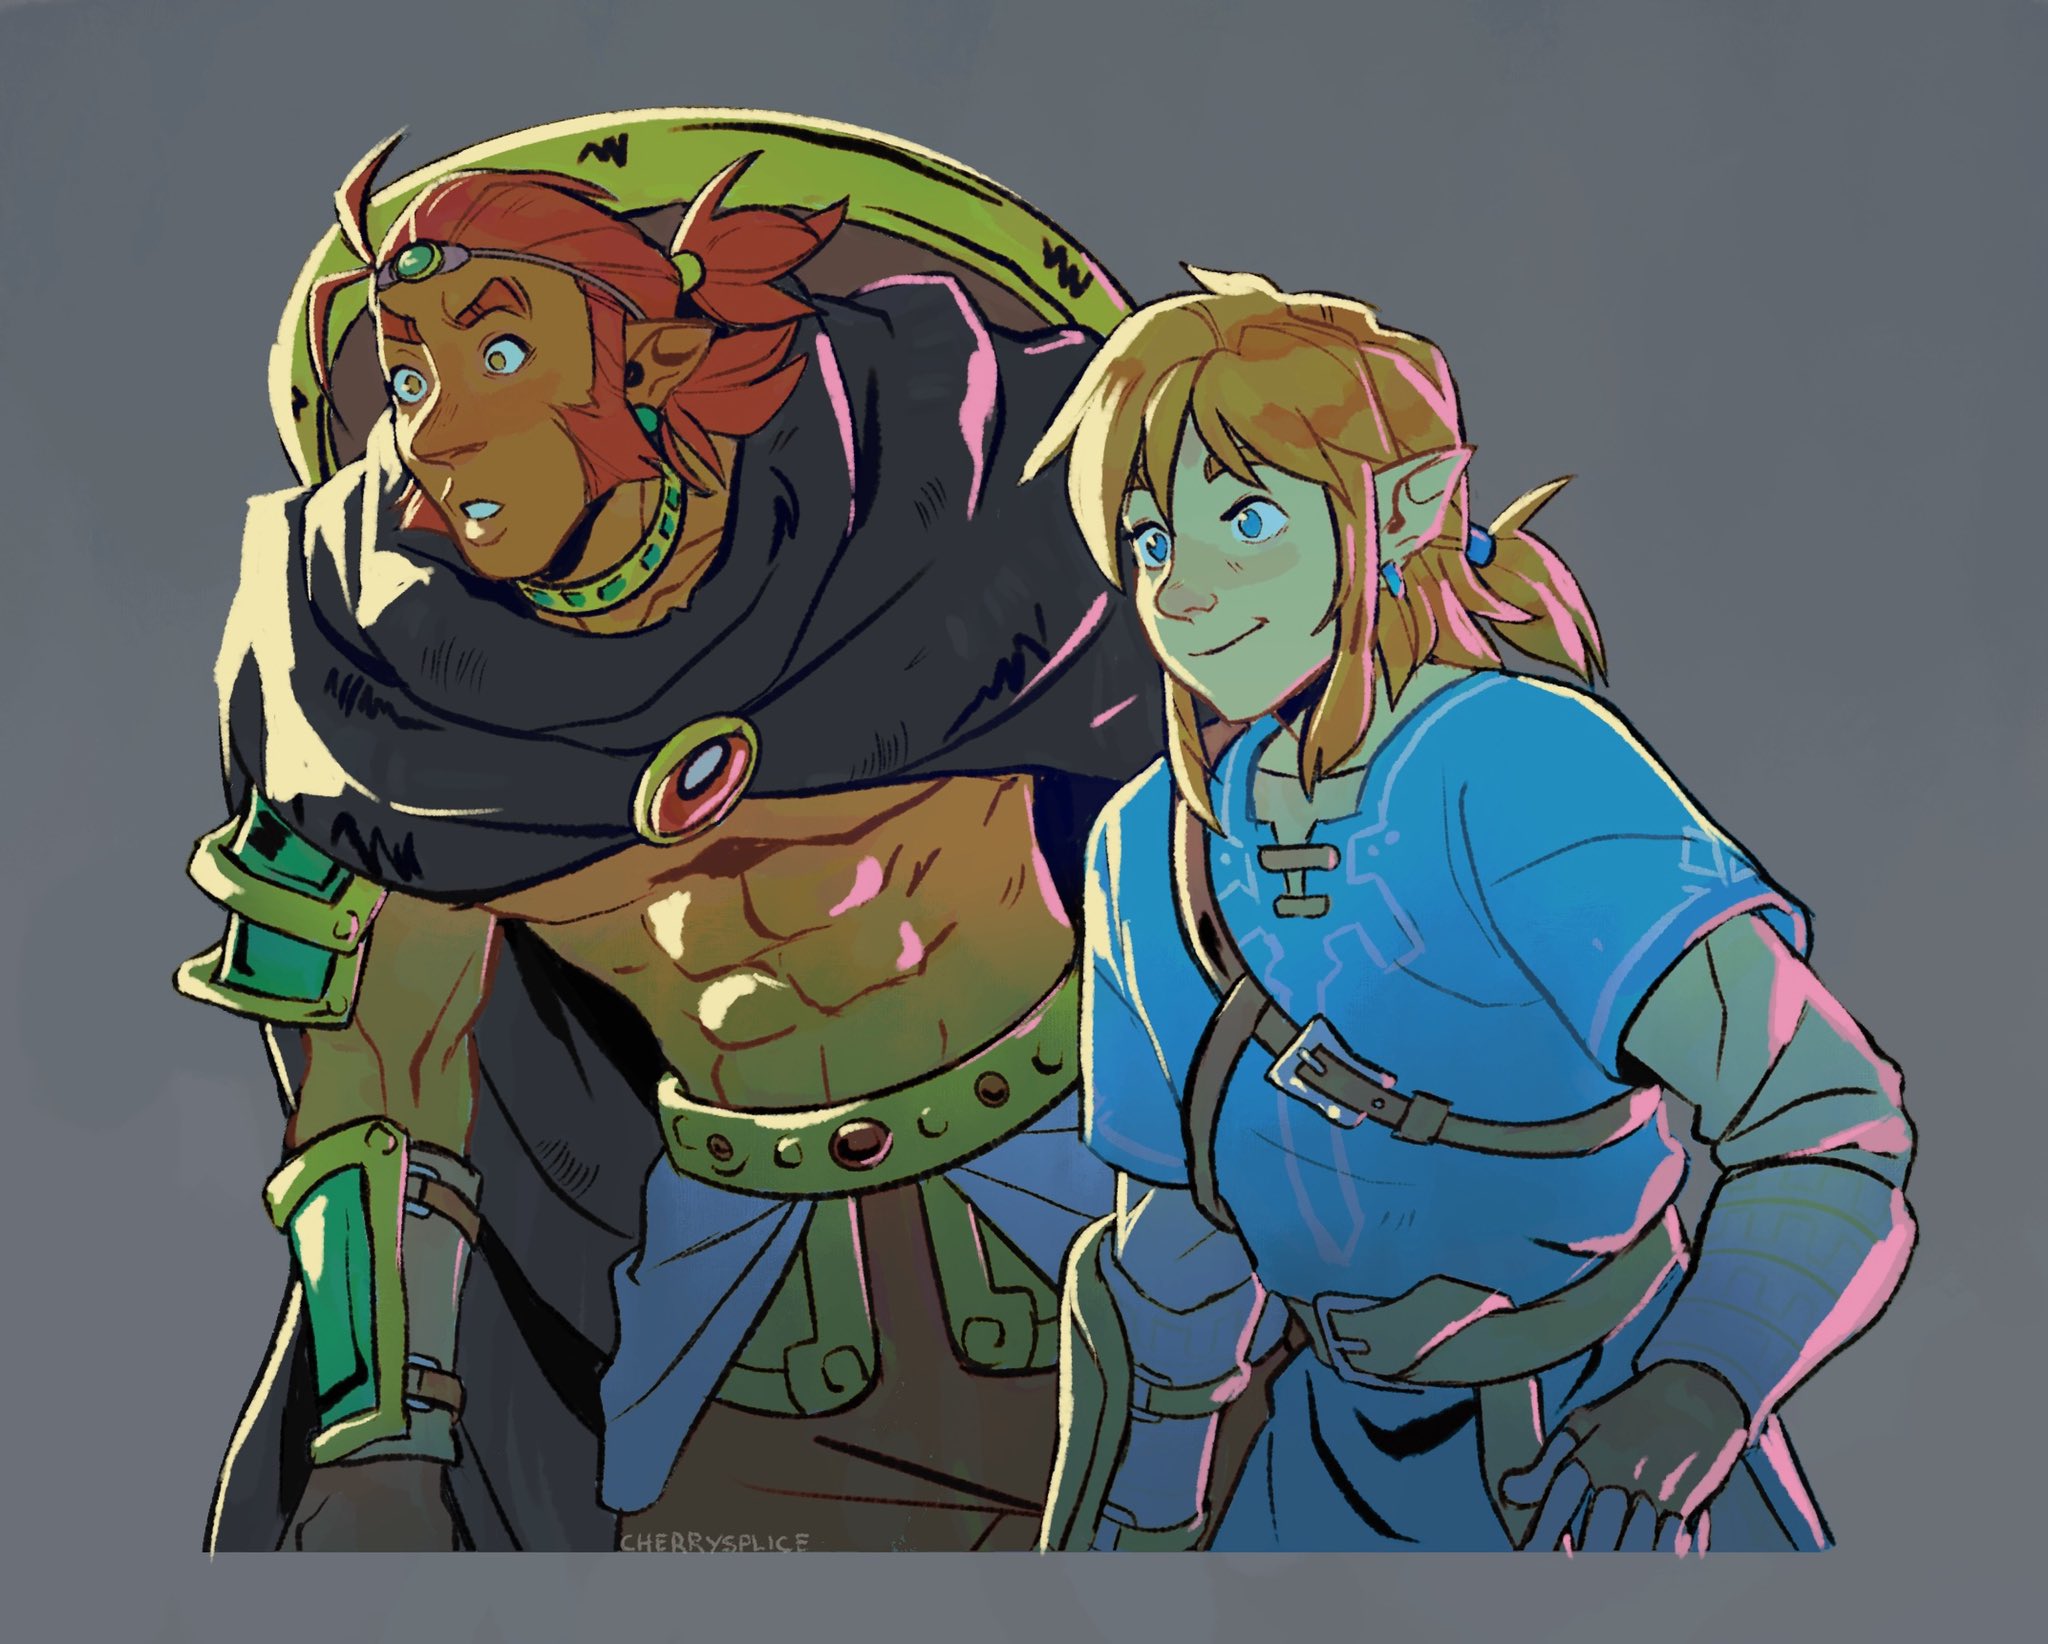 I missed the best boys Ganon and Link. 